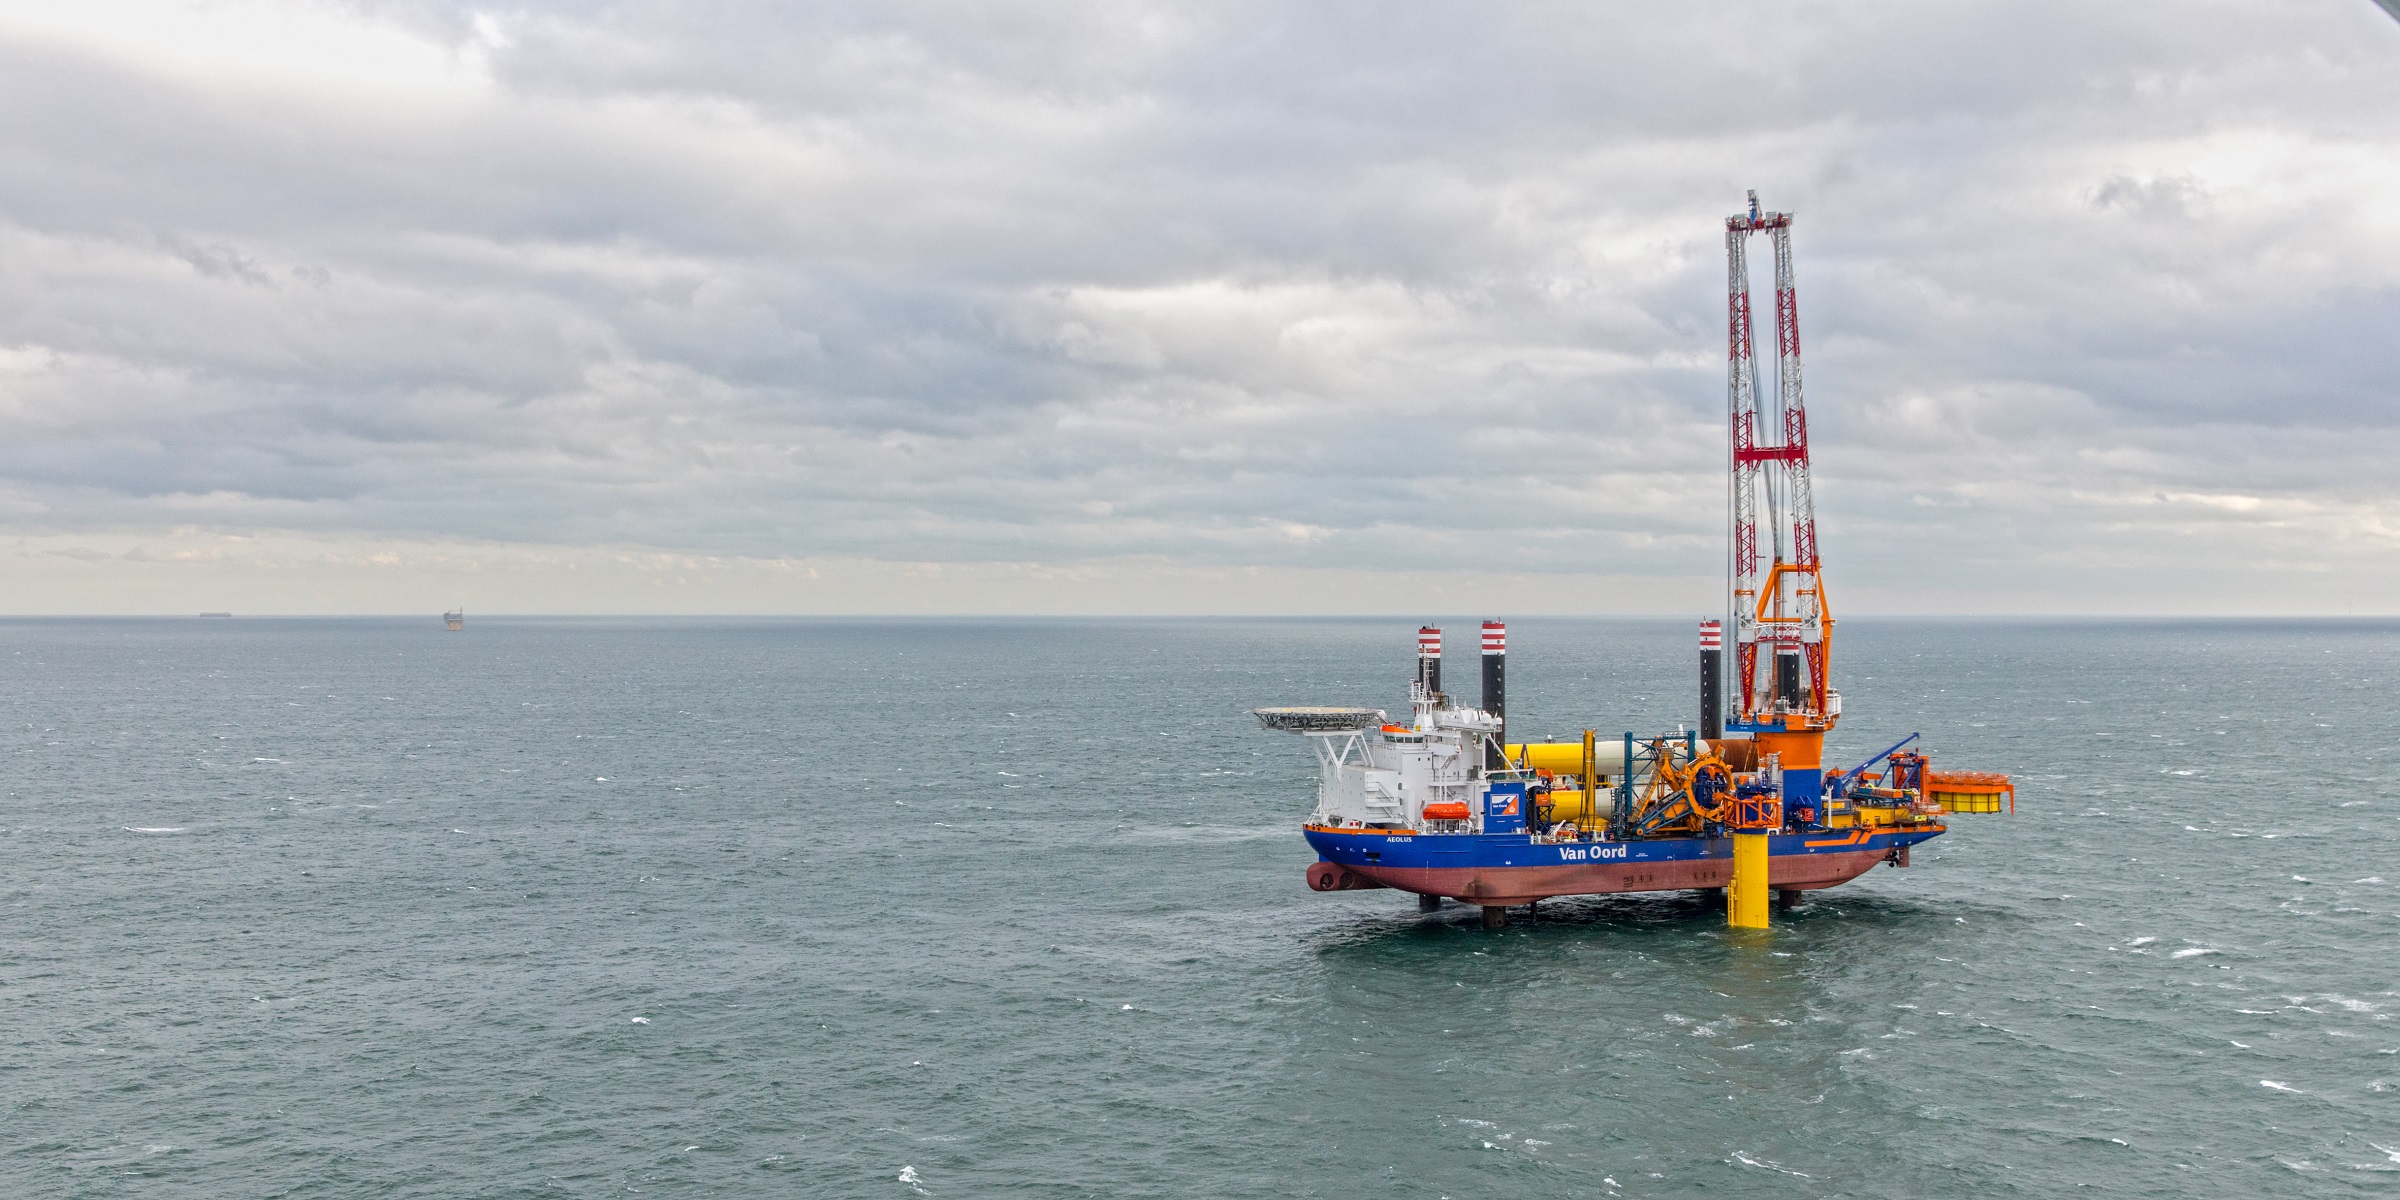 Van Oord awarded contract to construct Hollandse Kust (noord) offshore wind farm